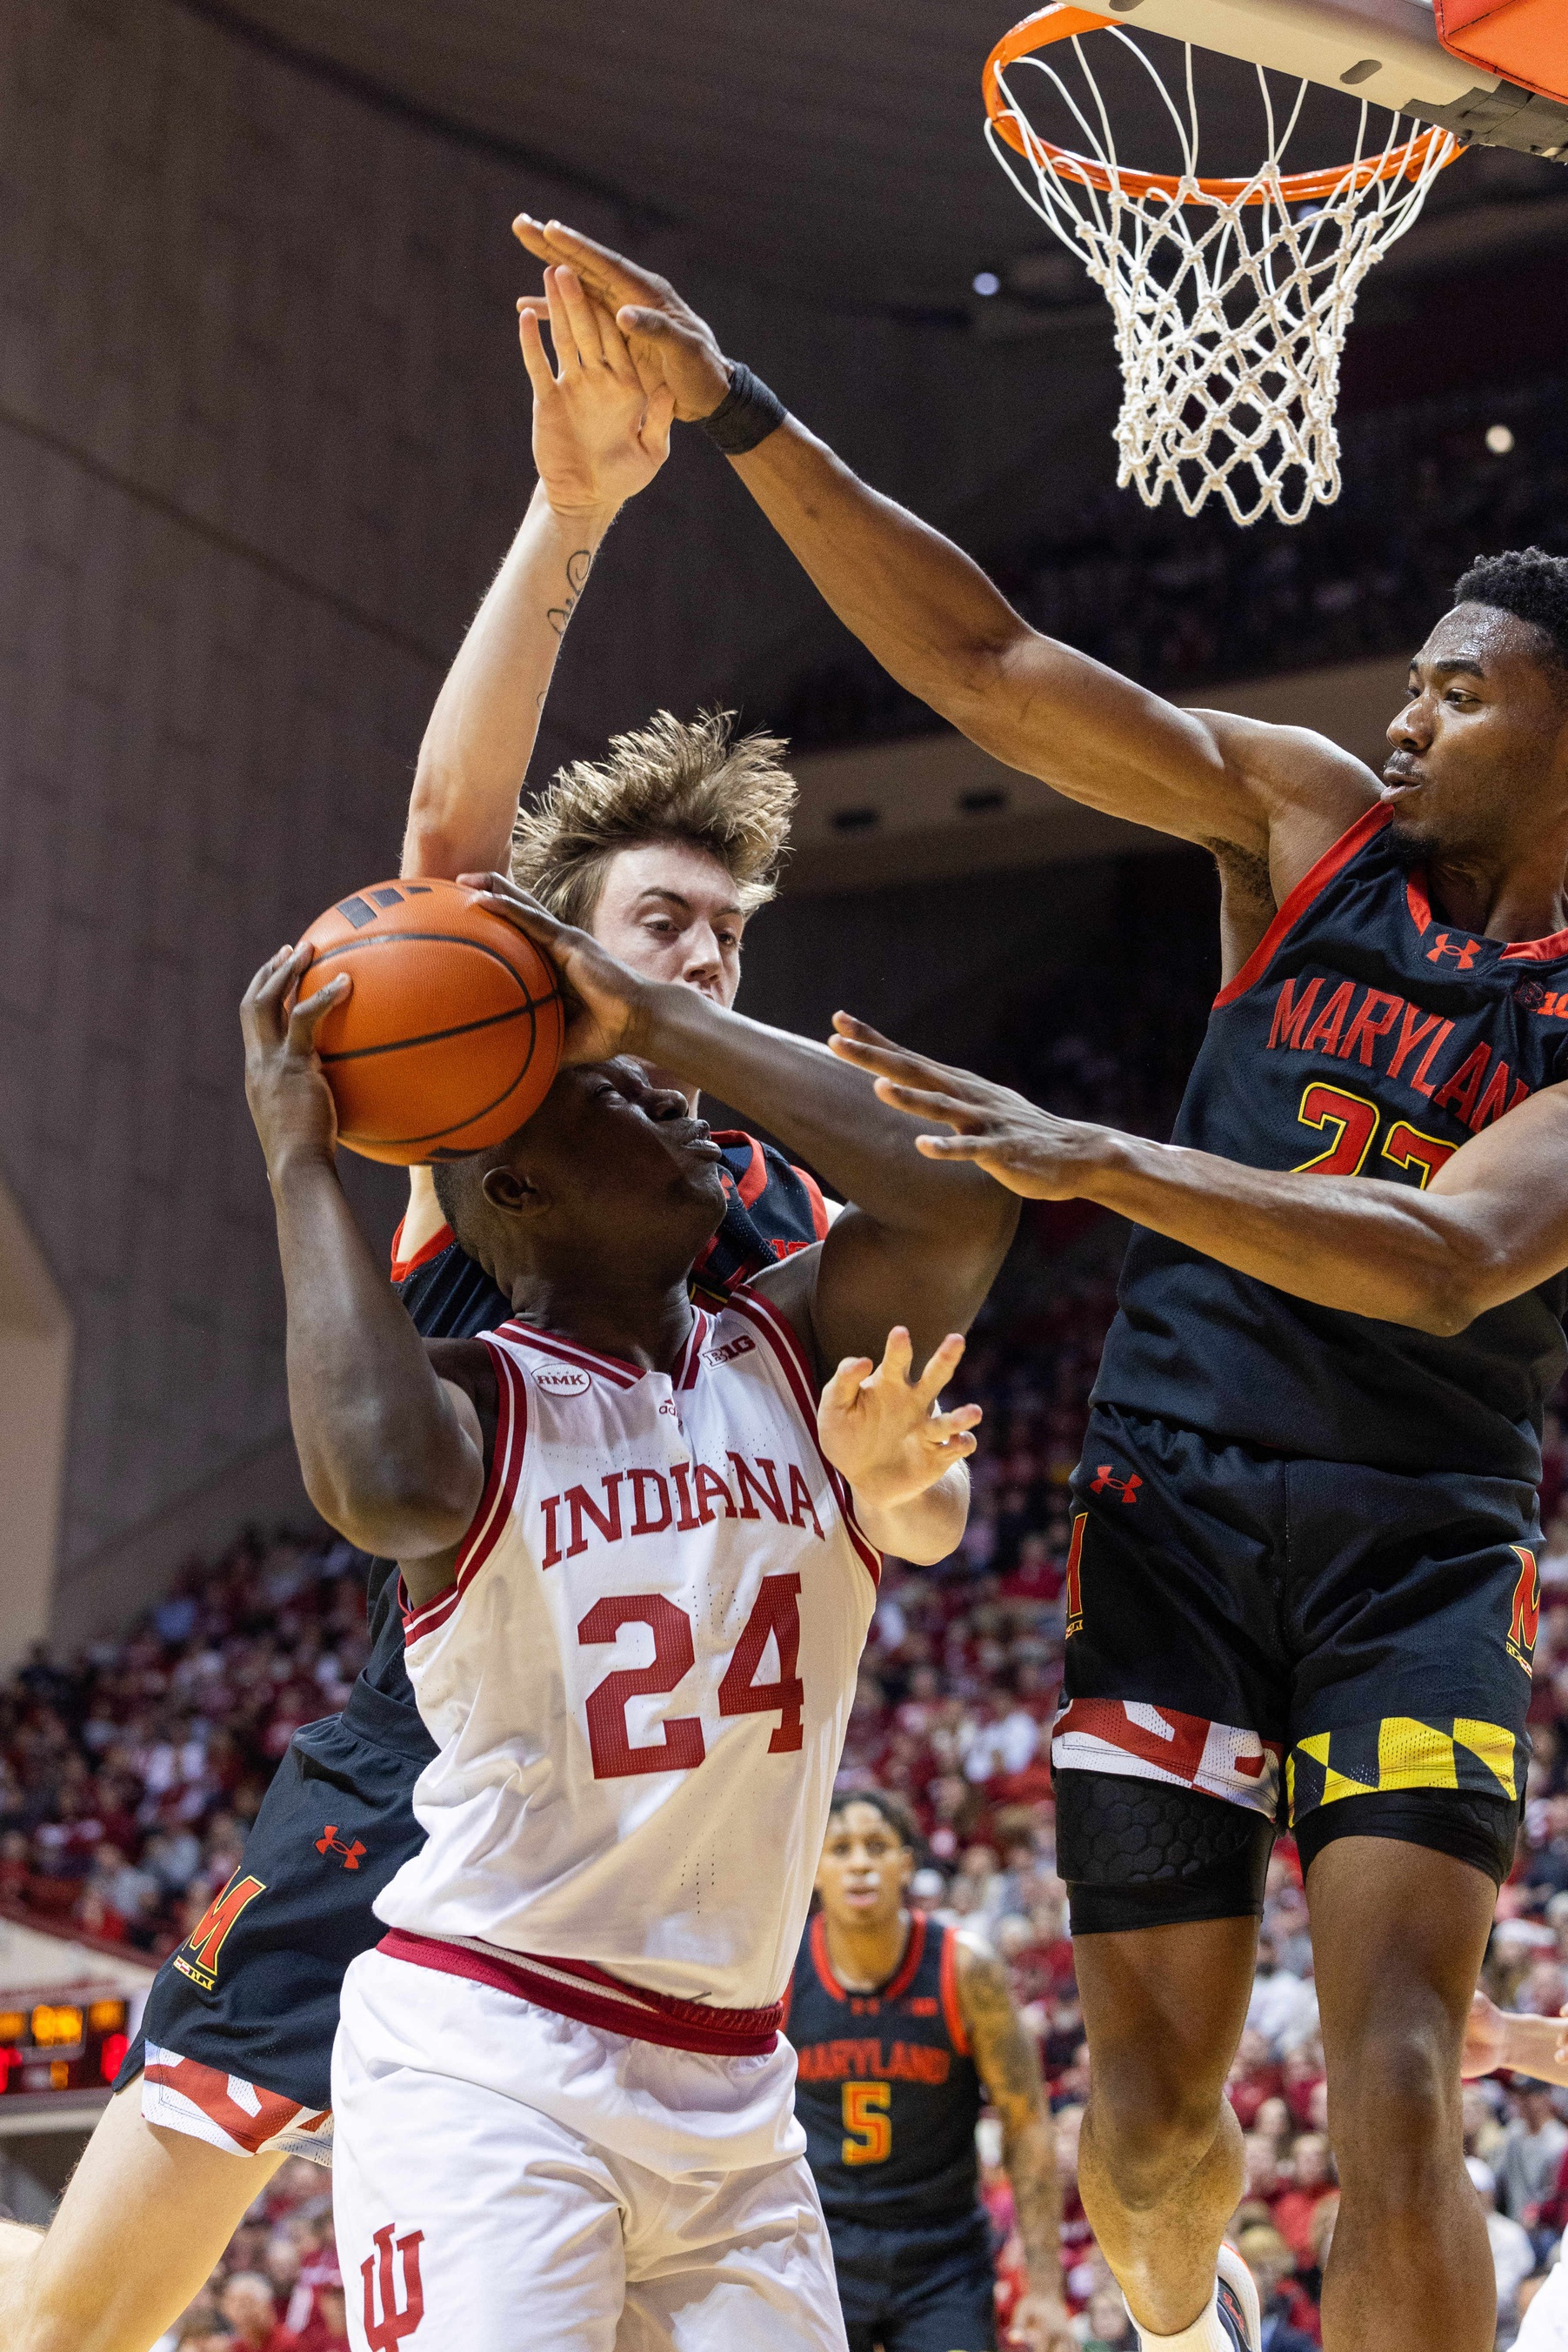  Indiana Hoosiers forward Payton Sparks (24) shoots the ball while Maryland Terrapins forward Jordan Geronimo (22) defends at Simon Skjodt Assembly Hall.   